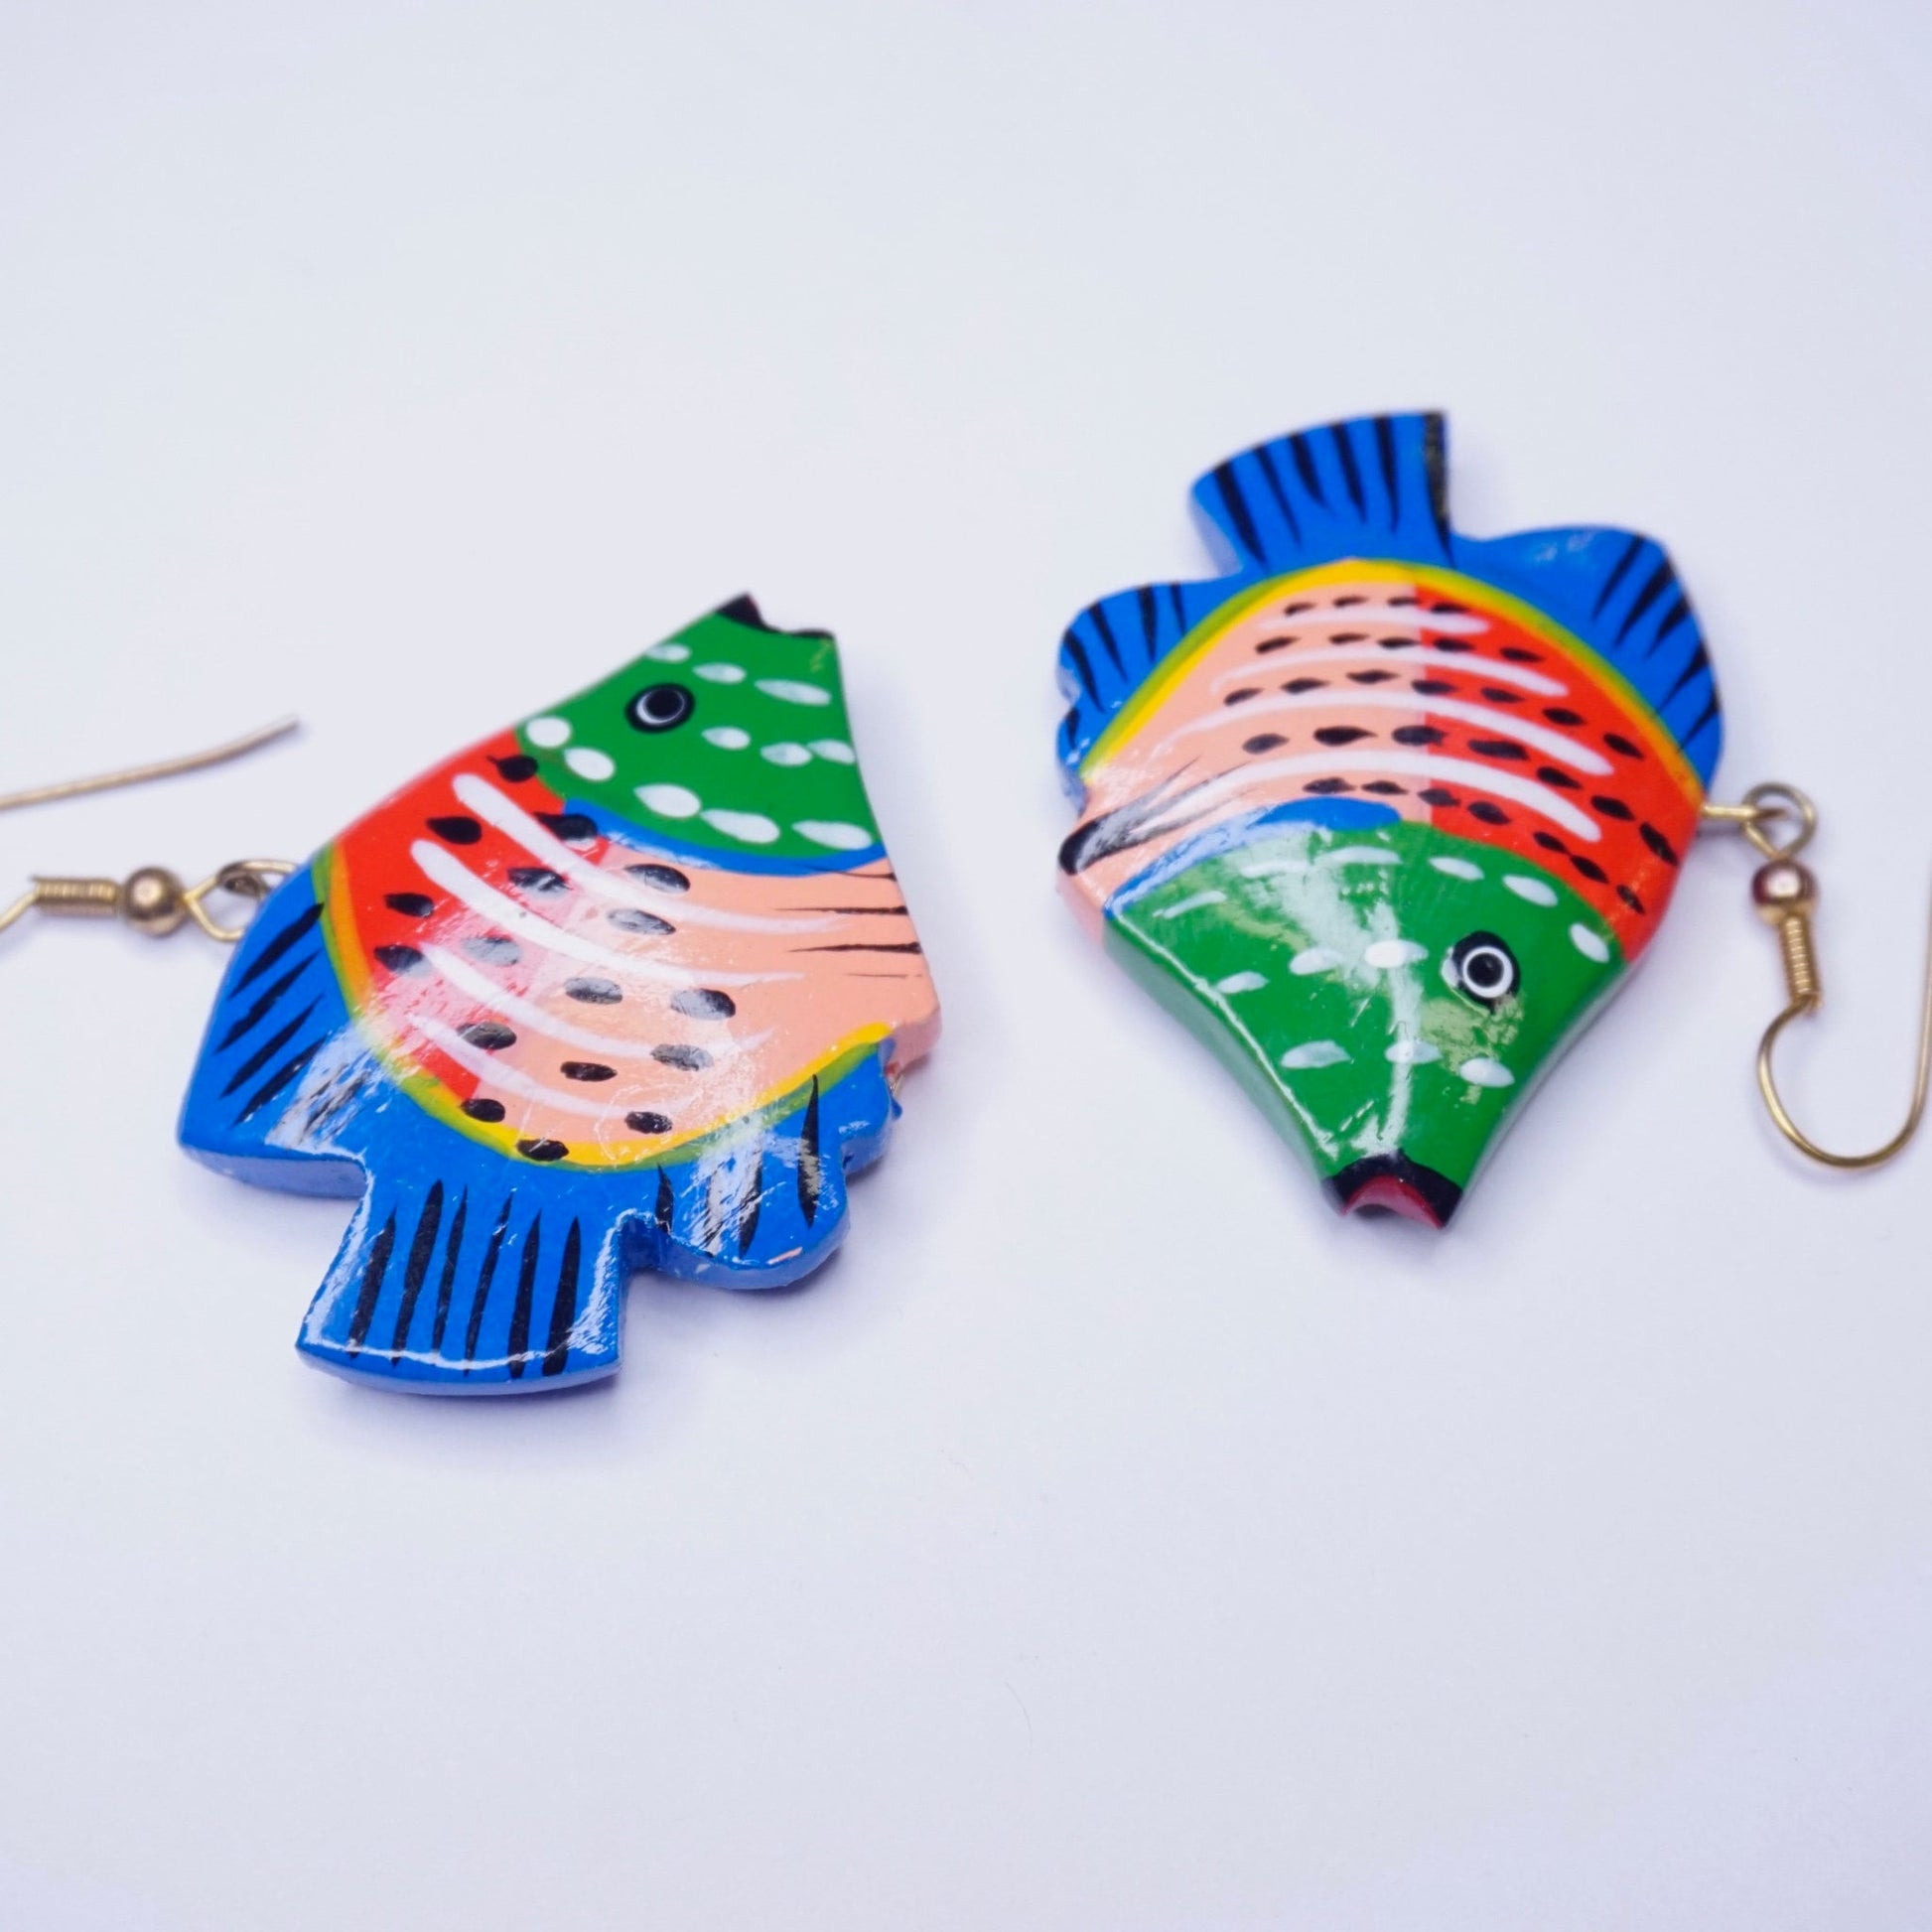 Alt text: Colorful vintage wood carved fish-shaped earrings with vibrant blue, green, pink, and white paint details on a white background, featuring gold-tone dangle hooks, handmade wooden statement earrings.